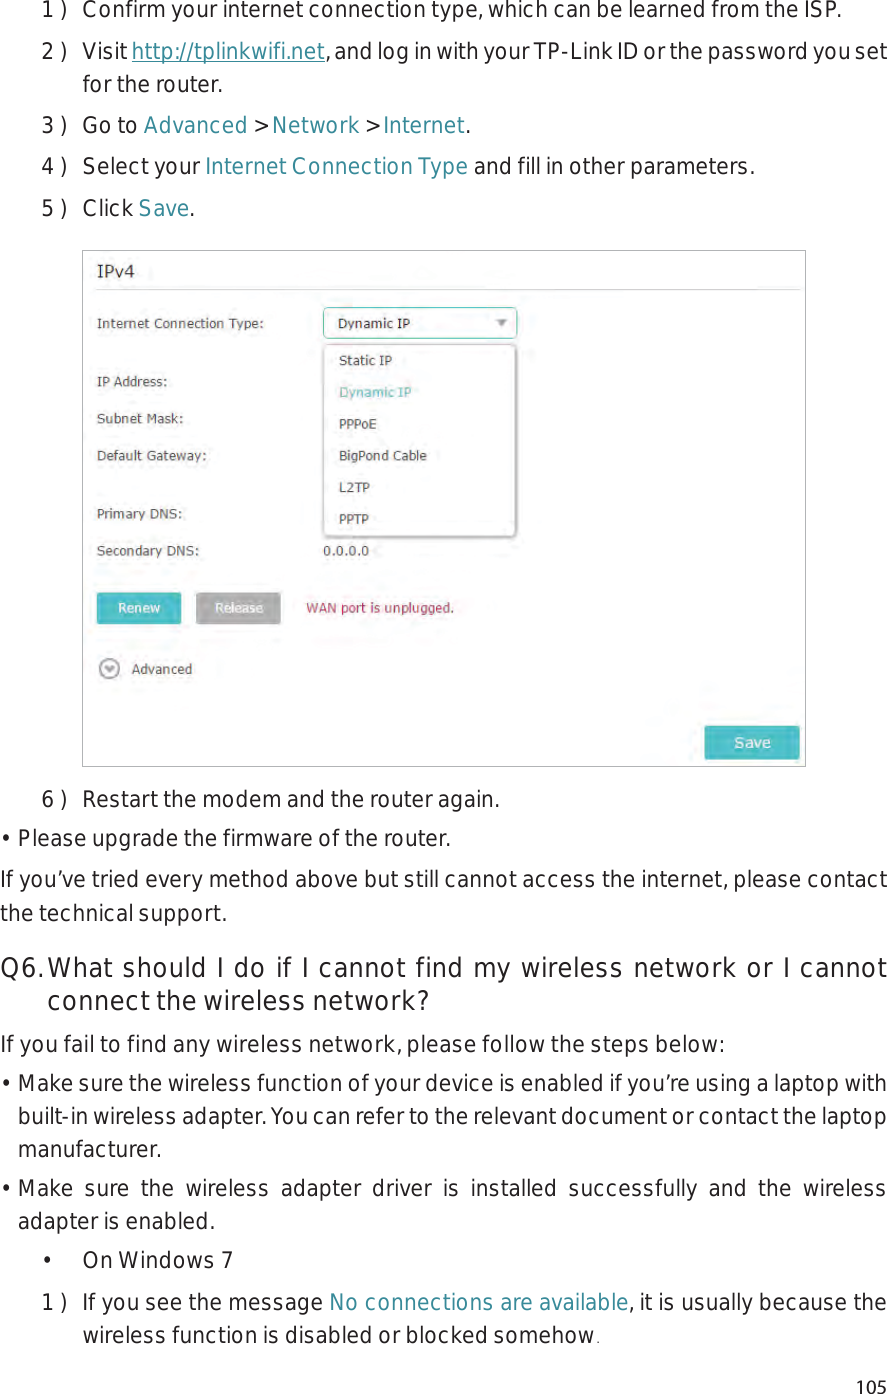 1051 )  Confirm your internet connection type, which can be learned from the ISP.2 )  Visit http://tplinkwifi.net, and log in with your TP-Link ID or the password you set for the router.3 )  Go to Advanced &gt; Network &gt; Internet.4 )  Select your Internet Connection Type and fill in other parameters.5 )  Click Save.6 )  Restart the modem and the router again.• Please upgrade the firmware of the router.If you’ve tried every method above but still cannot access the internet, please contact the technical support.Q6. What should I do if I cannot find my wireless network or I cannot connect the wireless network?If you fail to find any wireless network, please follow the steps below:•  Make sure the wireless function of your device is enabled if you’re using a laptop with built-in wireless adapter. You can refer to the relevant document or contact the laptop manufacturer.• Make sure the wireless adapter driver is installed successfully and the wireless adapter is enabled.•  On Windows 71 )  If you see the message No connections are available, it is usually because the wireless function is disabled or blocked somehow.